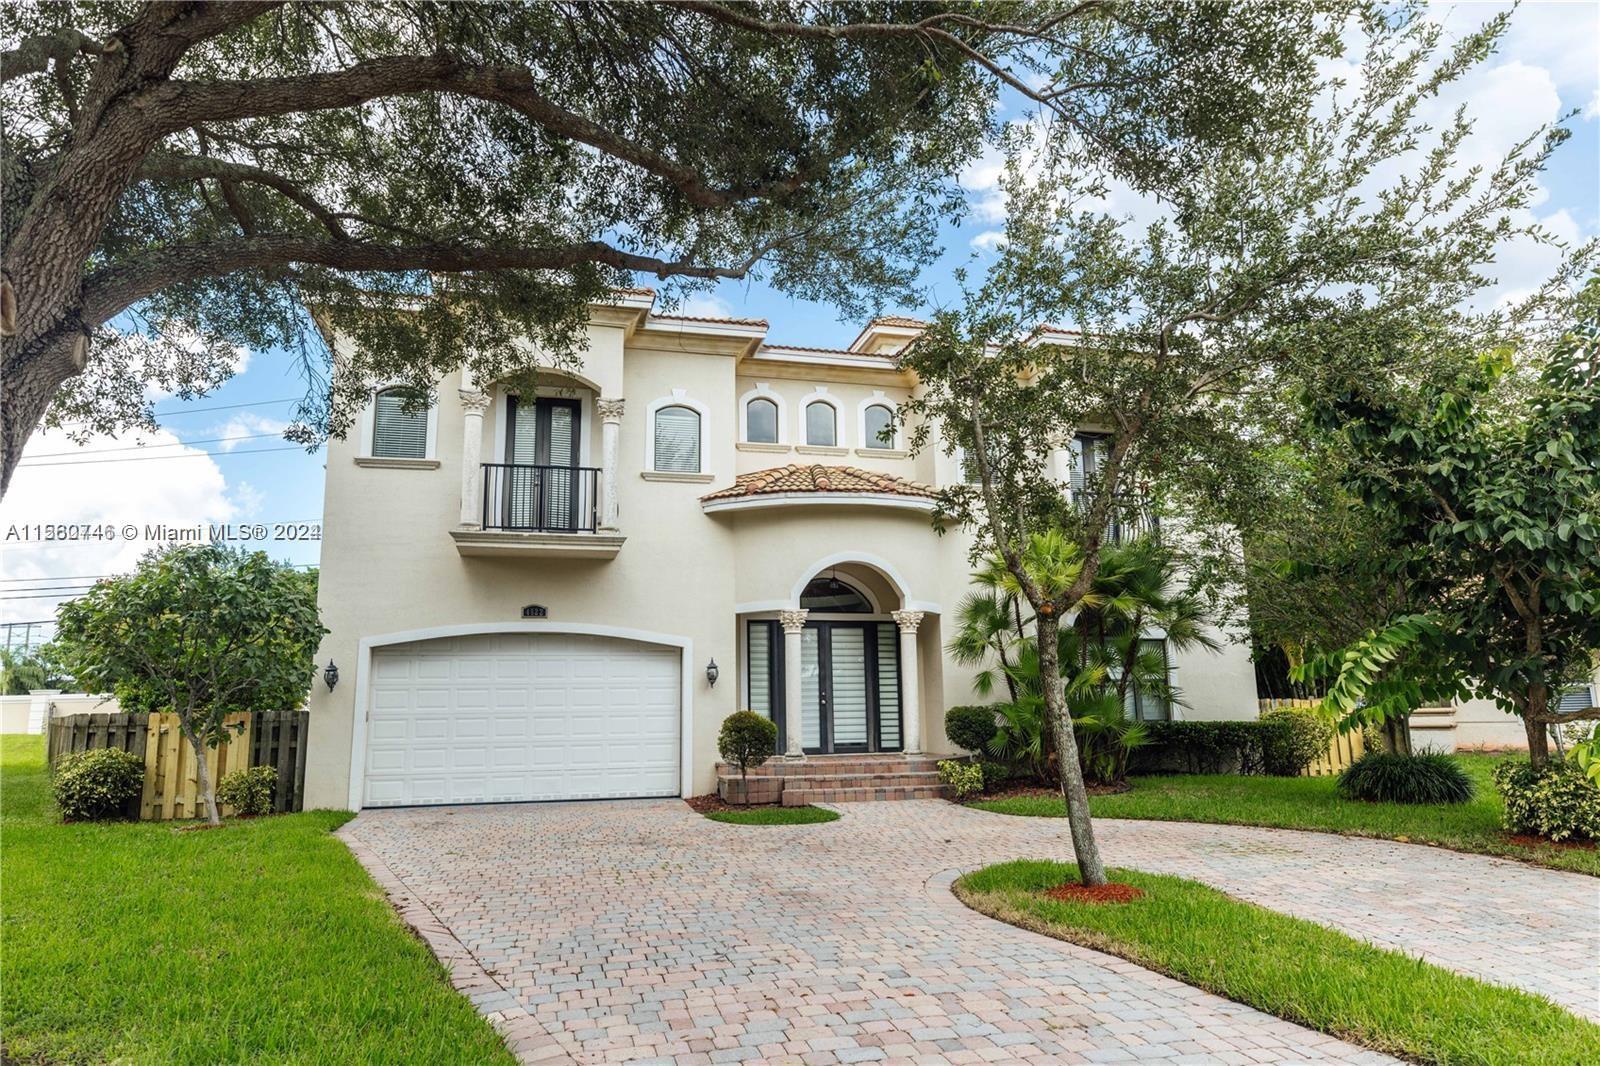 Photo of 4522 NW 67th Ave in Coral Springs, FL